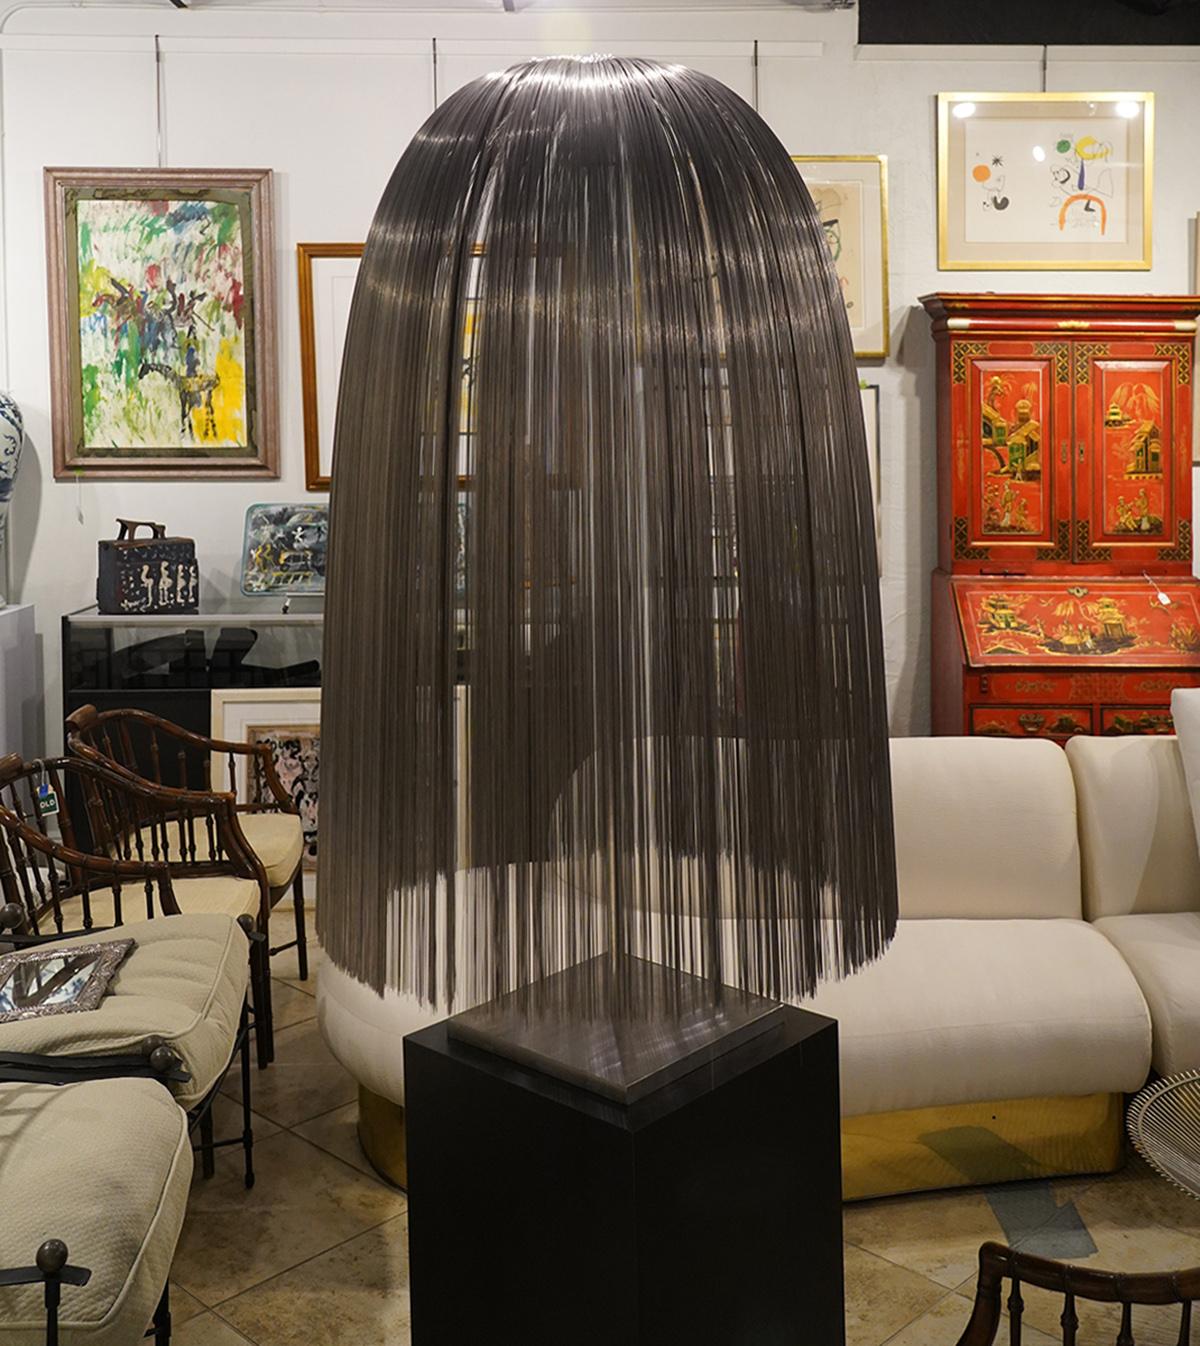 Harry Bertoia, American (1915-1978). Kinetic stainless steel wires bundled with steel stem, inserted in base on free standing tube and mounted on square base. Gathered wire sculture took inspiration from the weeping willow tree. Wires are attached